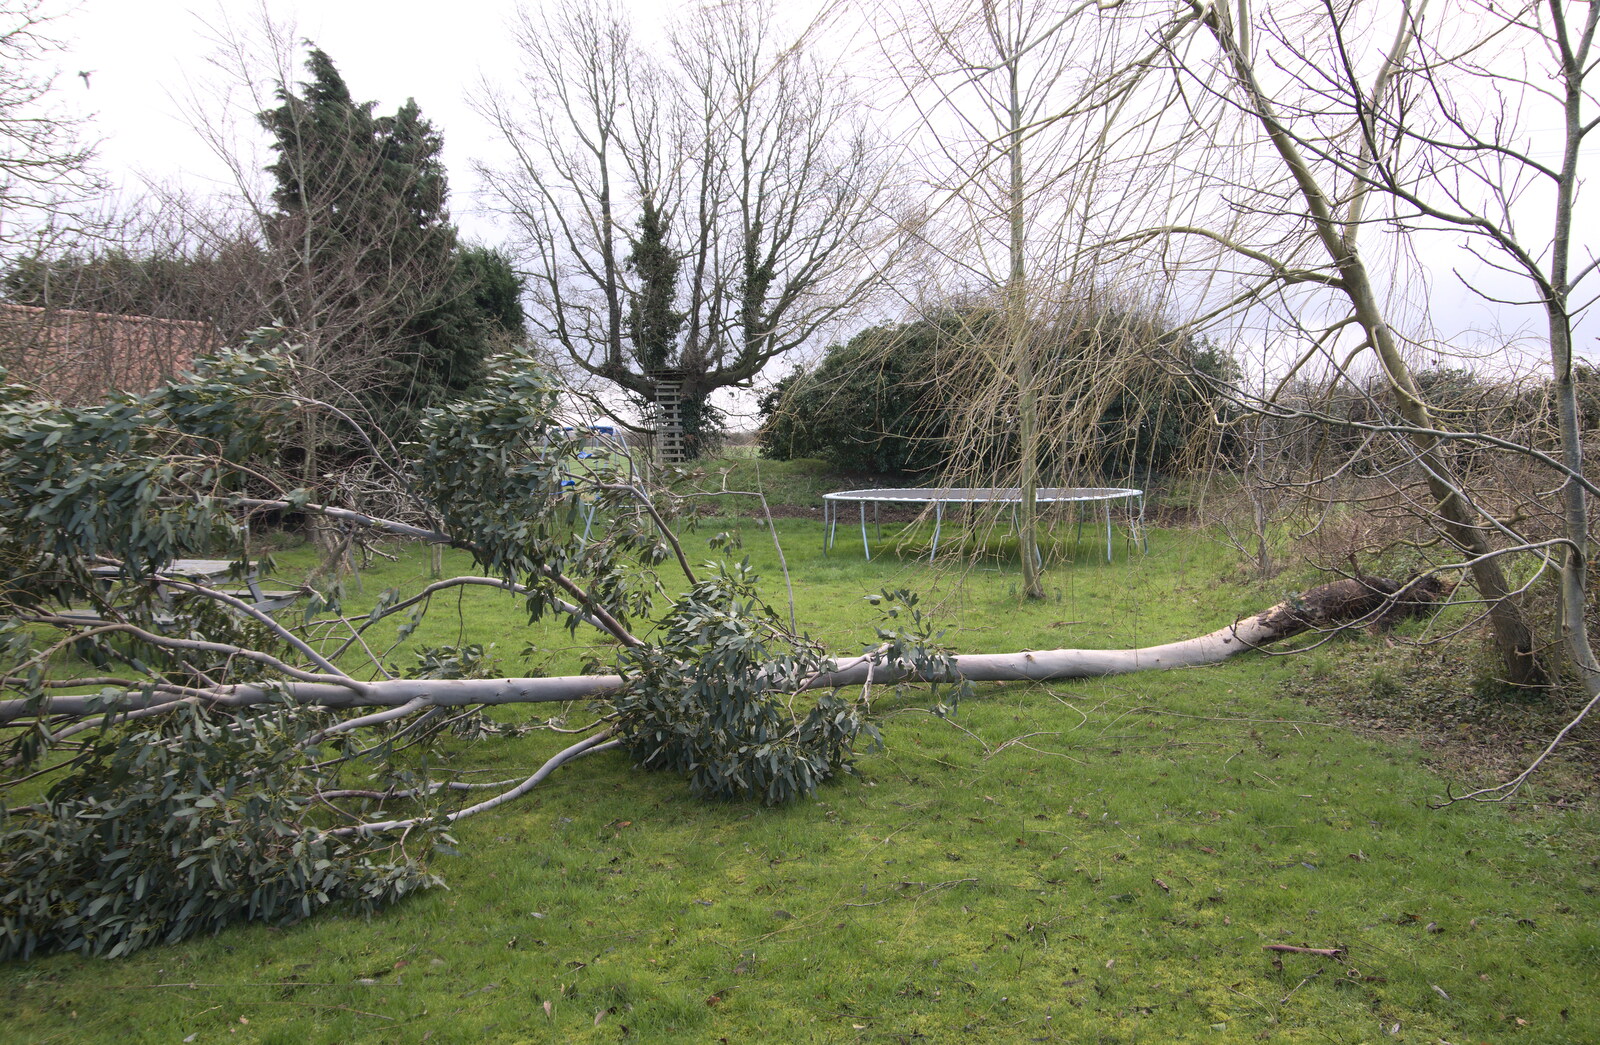 Storm Eunice blows down the Eucalyptus tree from The Swan Inn: An Epilogue, Brome, Suffolk - 17th February 2022